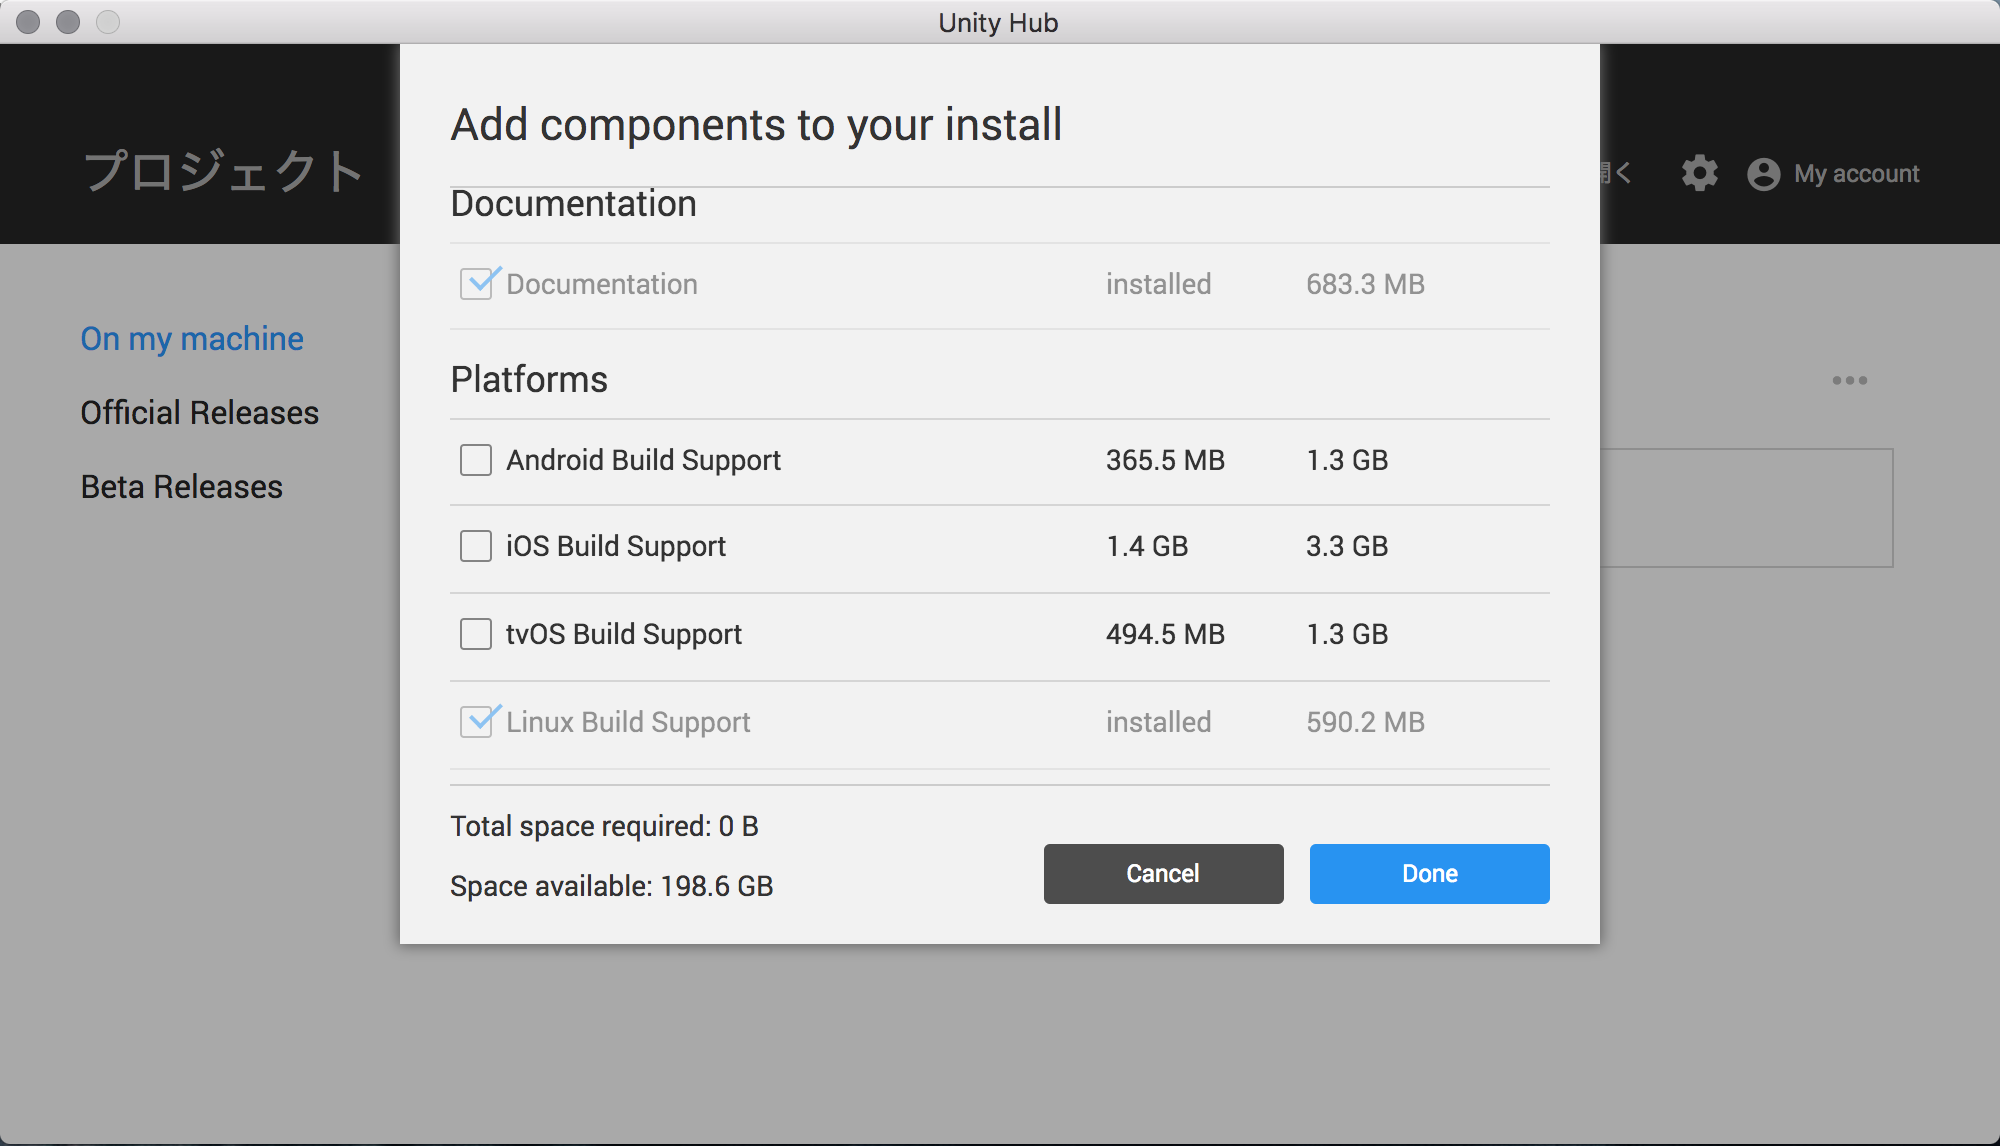 Add components to your install